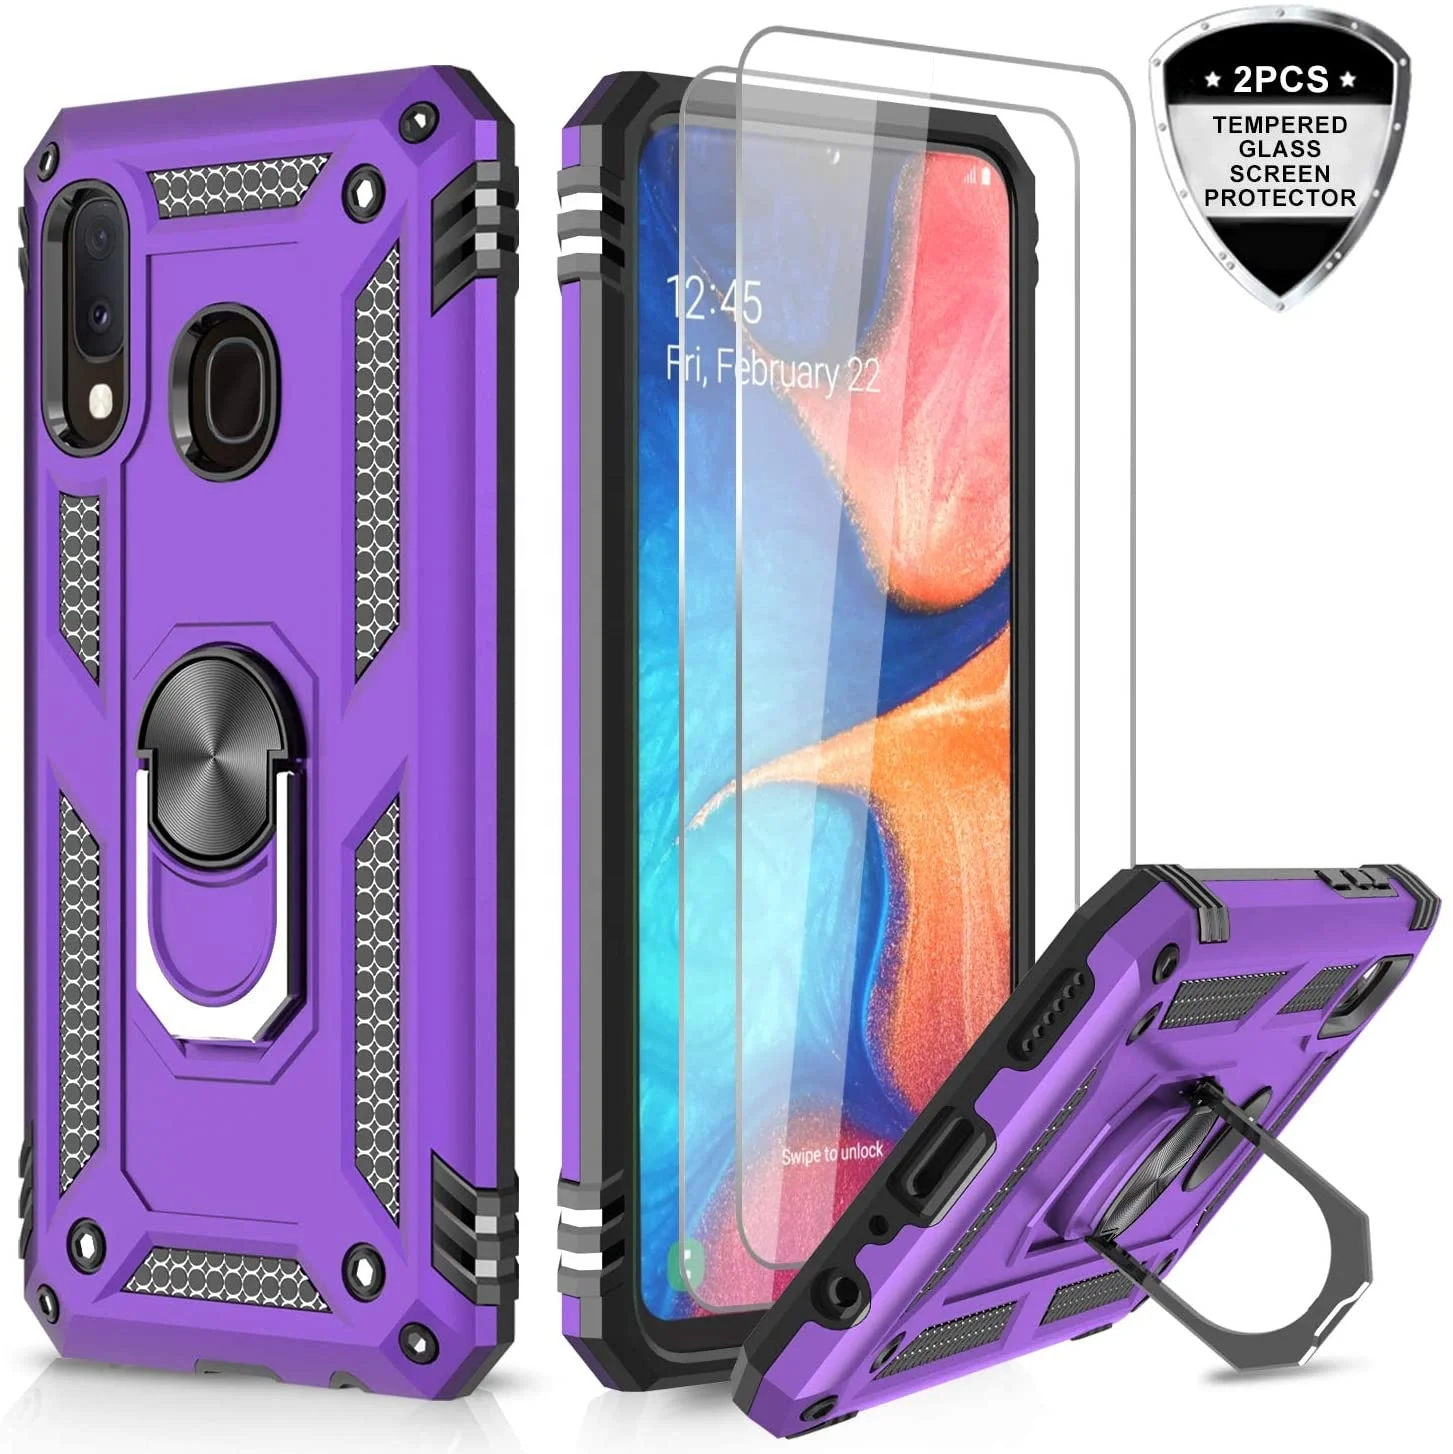 

LeYi For Samsung Galaxy A20/ A30 Cases with Tempered Glass Screen Protector [2Pack Military Grade Protective Cover Phone Case, Colors optional